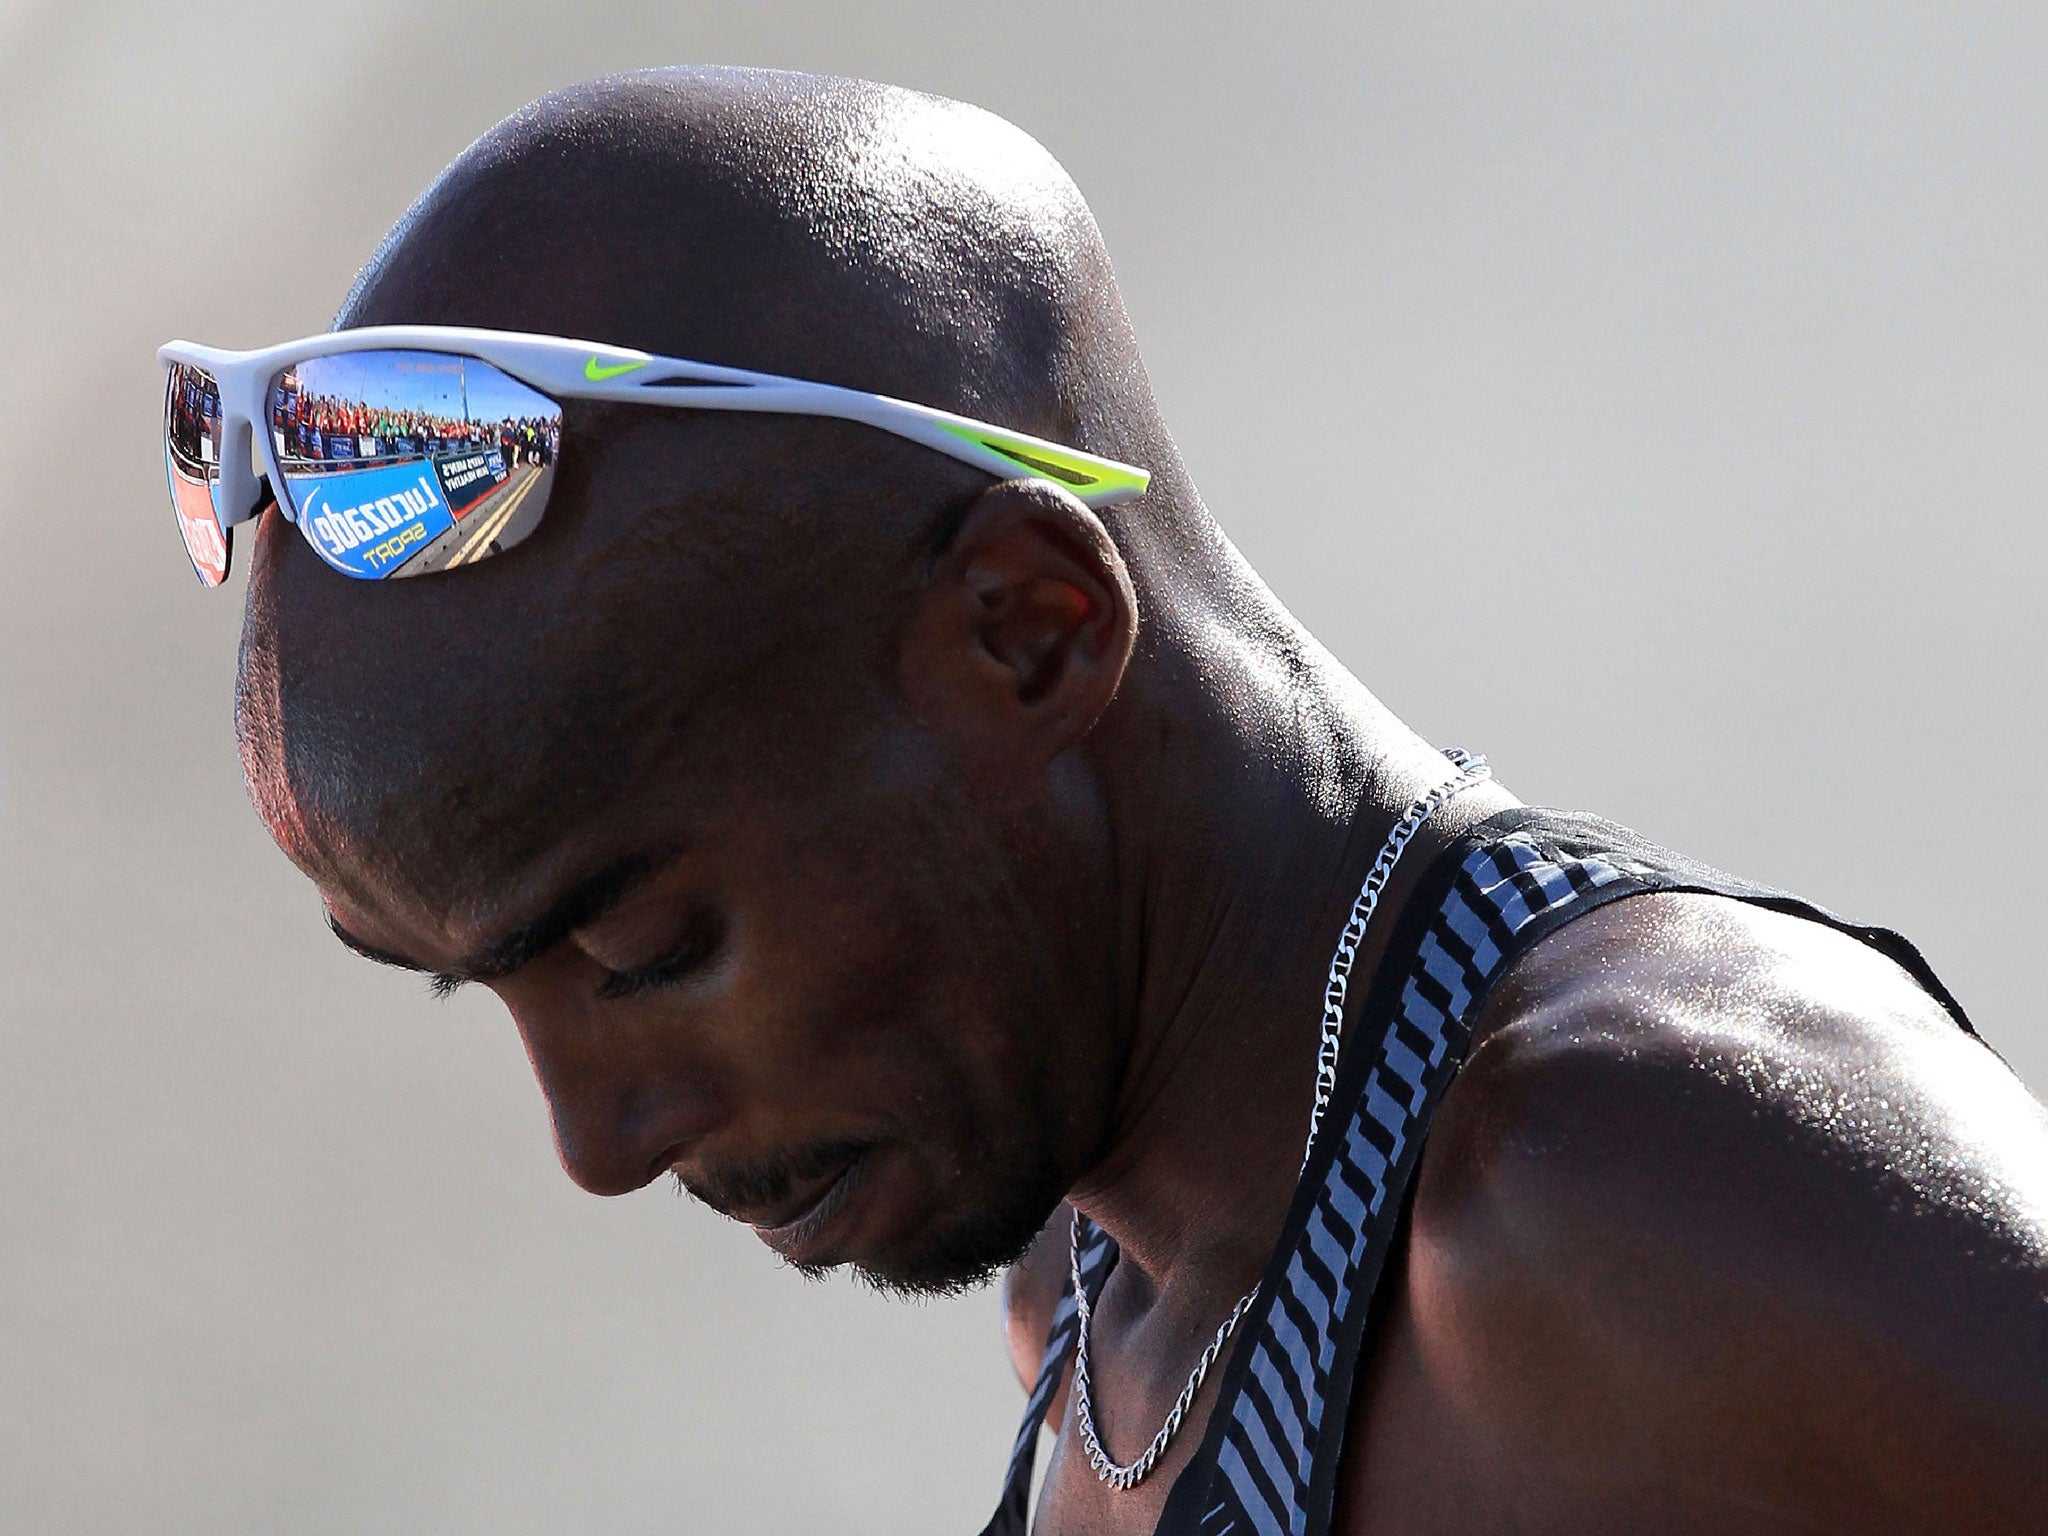 Mo Farah has once again been forced deny claims he has doped